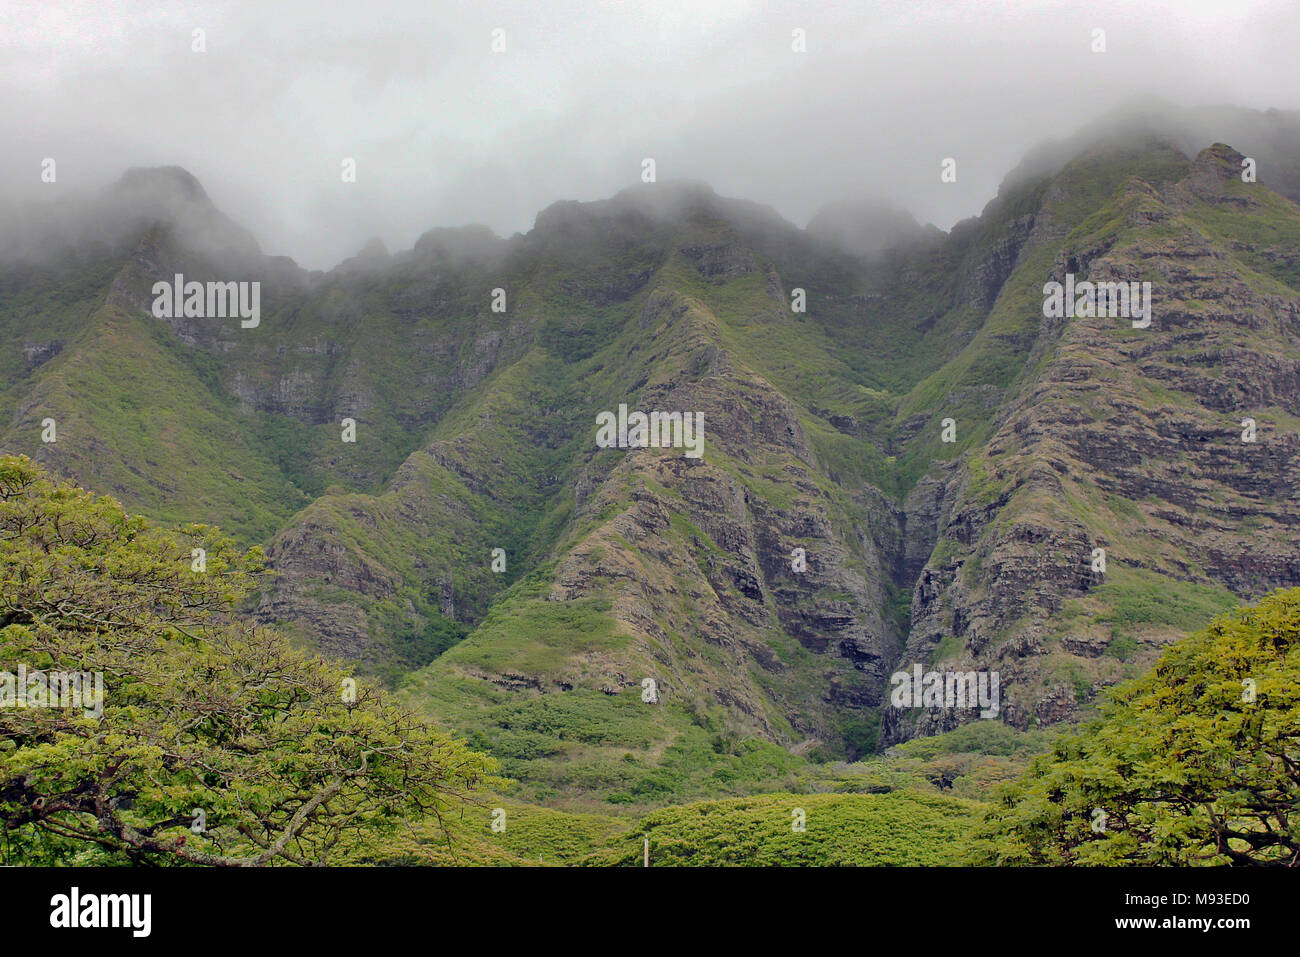 Jungle mountains covered in mist in the Kaaawa Valley on coast of the island of Oahu, Hawaii Stock Photo